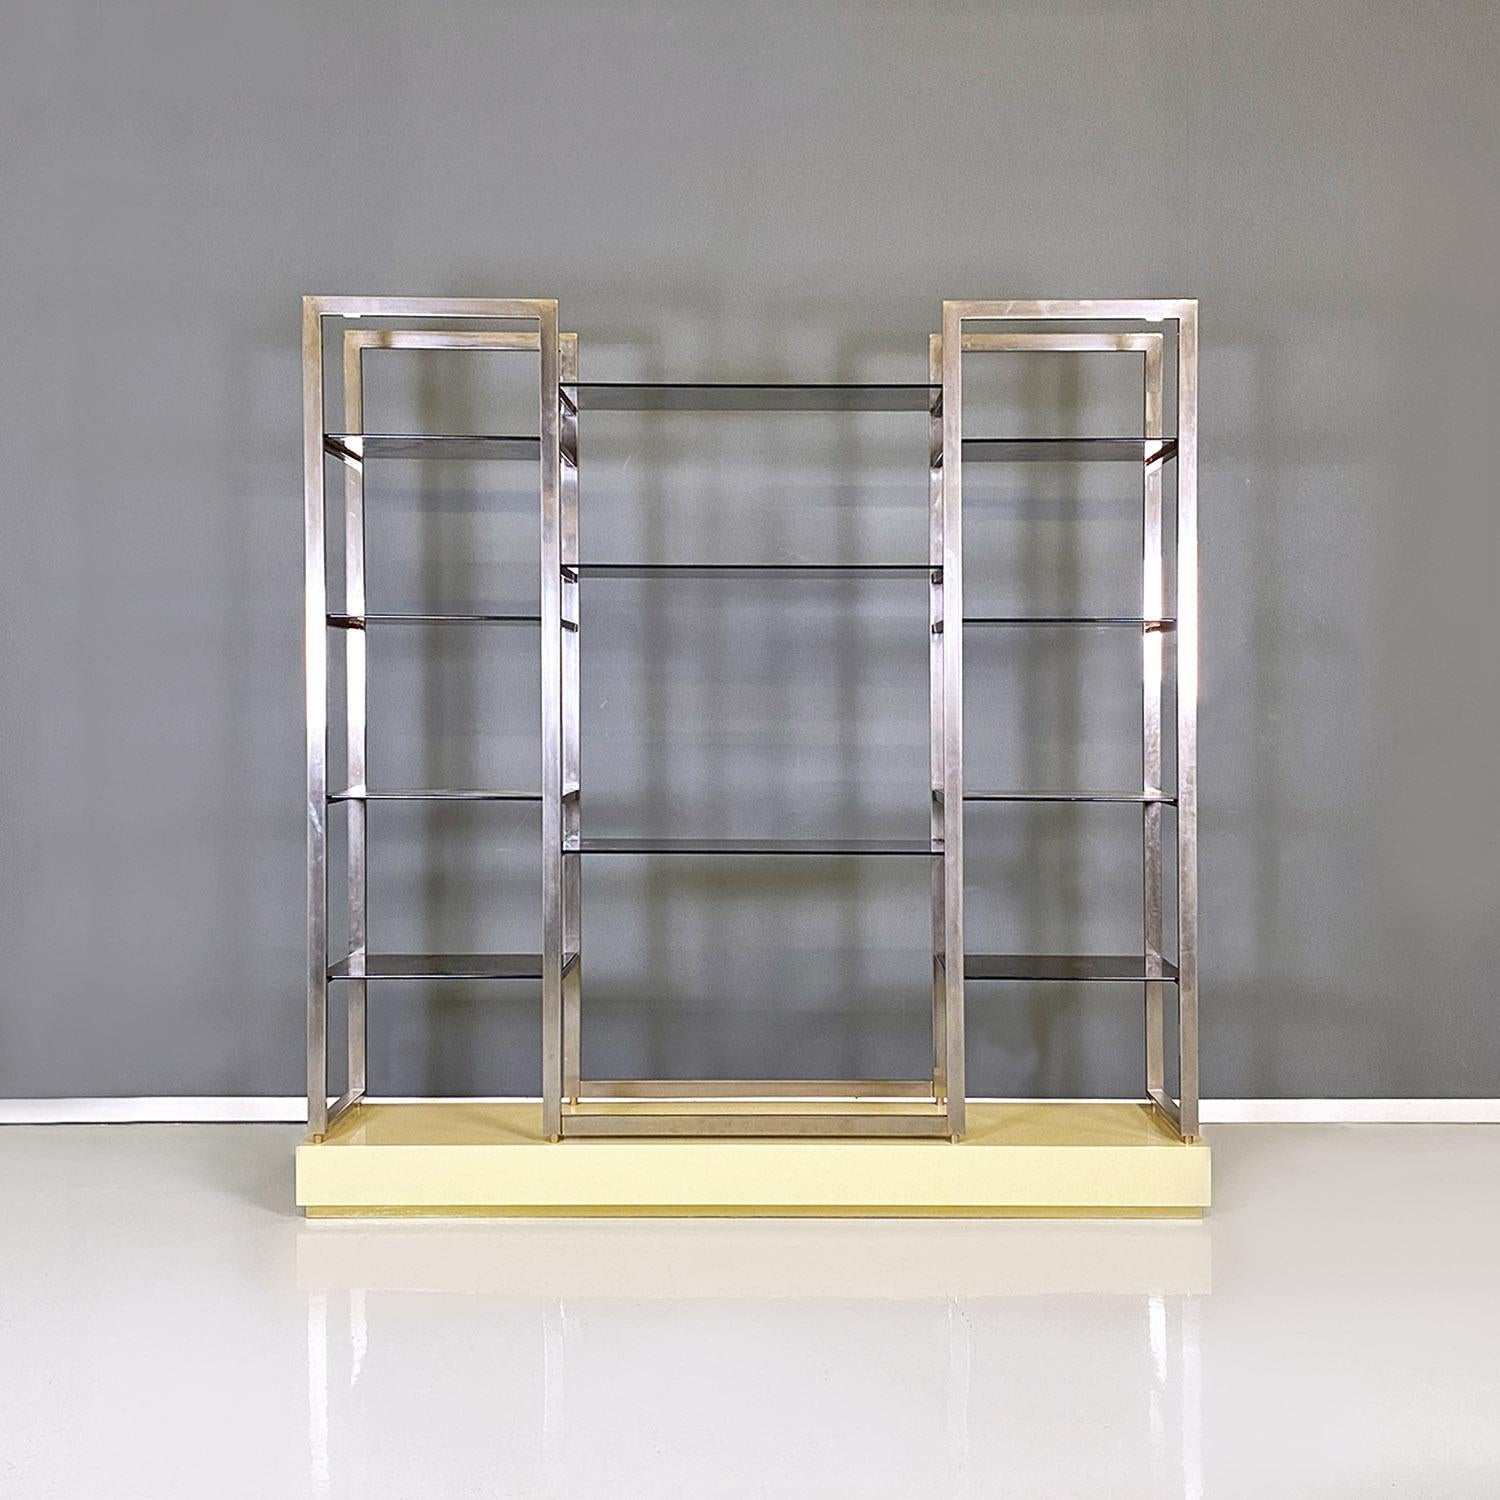 French modern smoked glass, metal and lacquered wood Bookcase by Alain Delon, 1980s
Self-supporting floor bookcase with a rectangular base in cream yellow lacquered wood and brass details. The bookcase features several smoked glass shelves, anchored